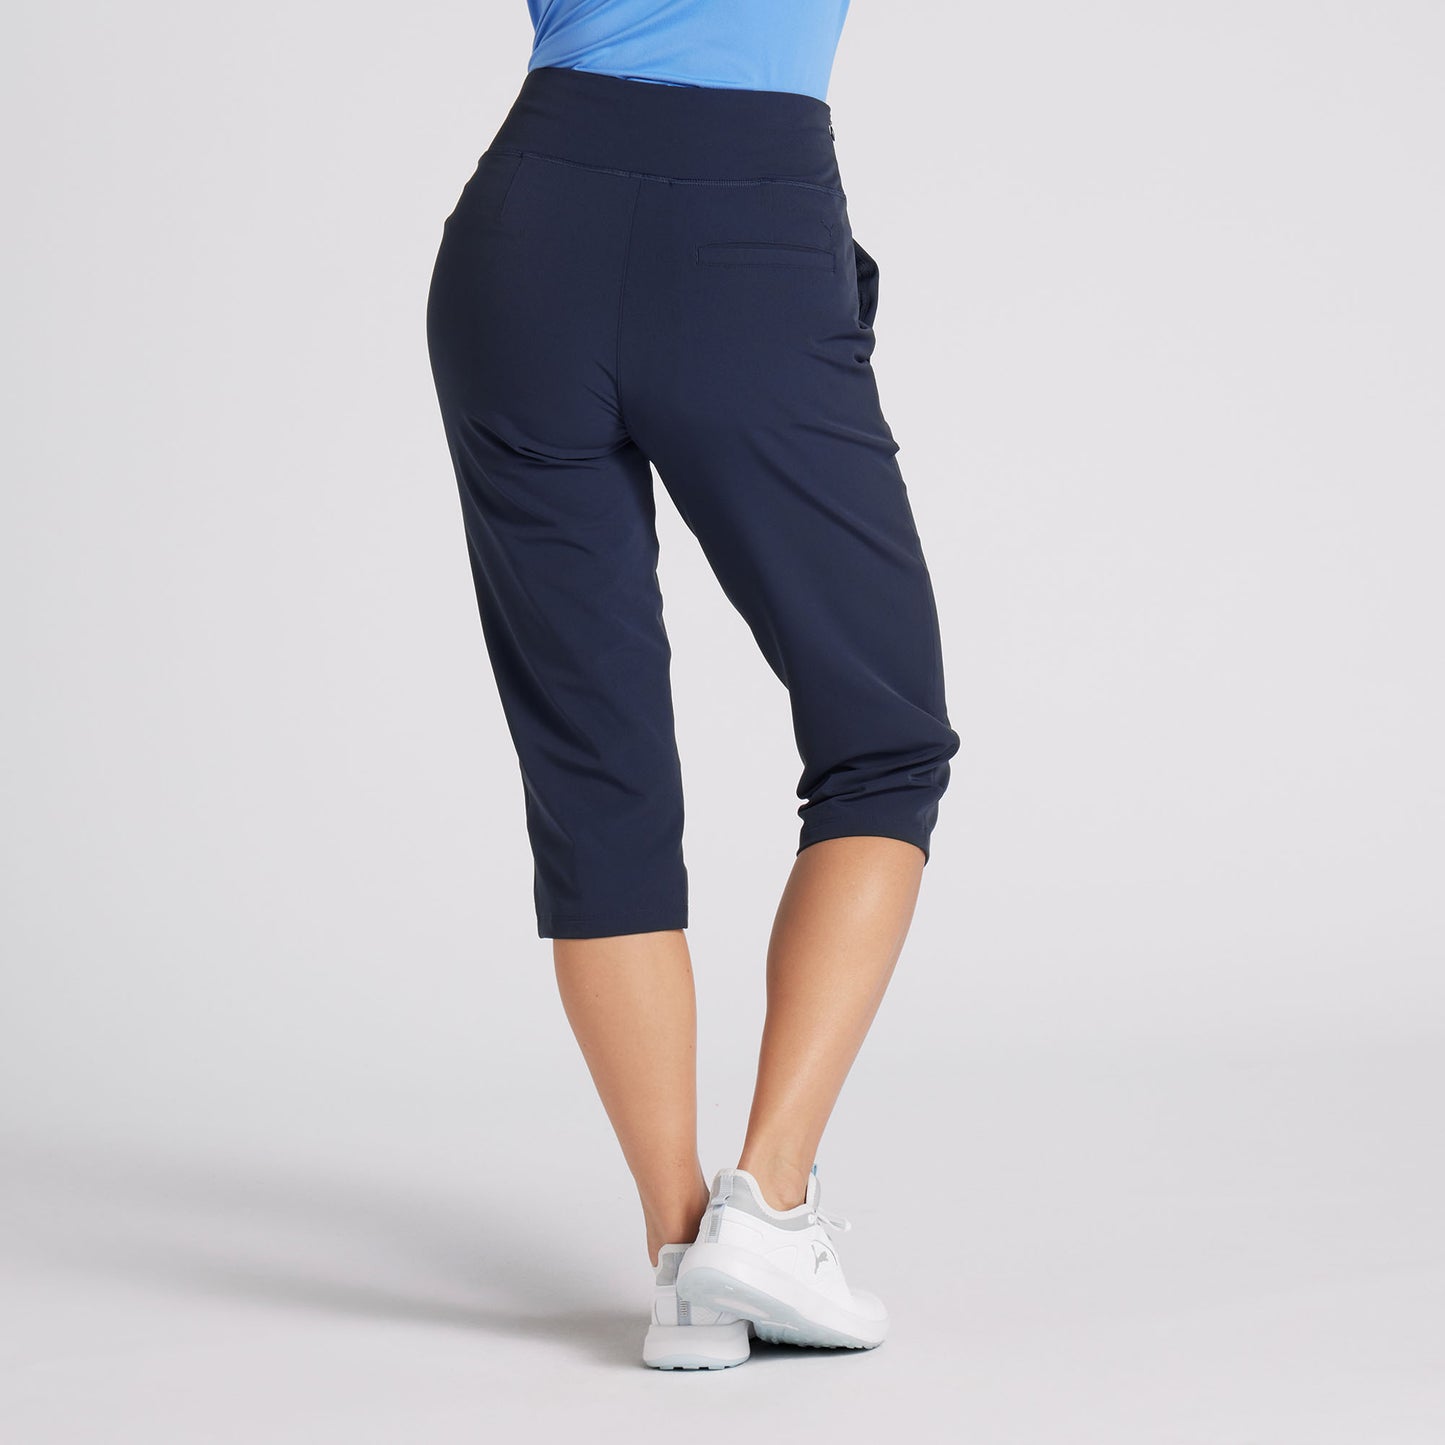 Puma Ladies Soft-Stretch High-Rise Capris in Deep Navy with UPF 40